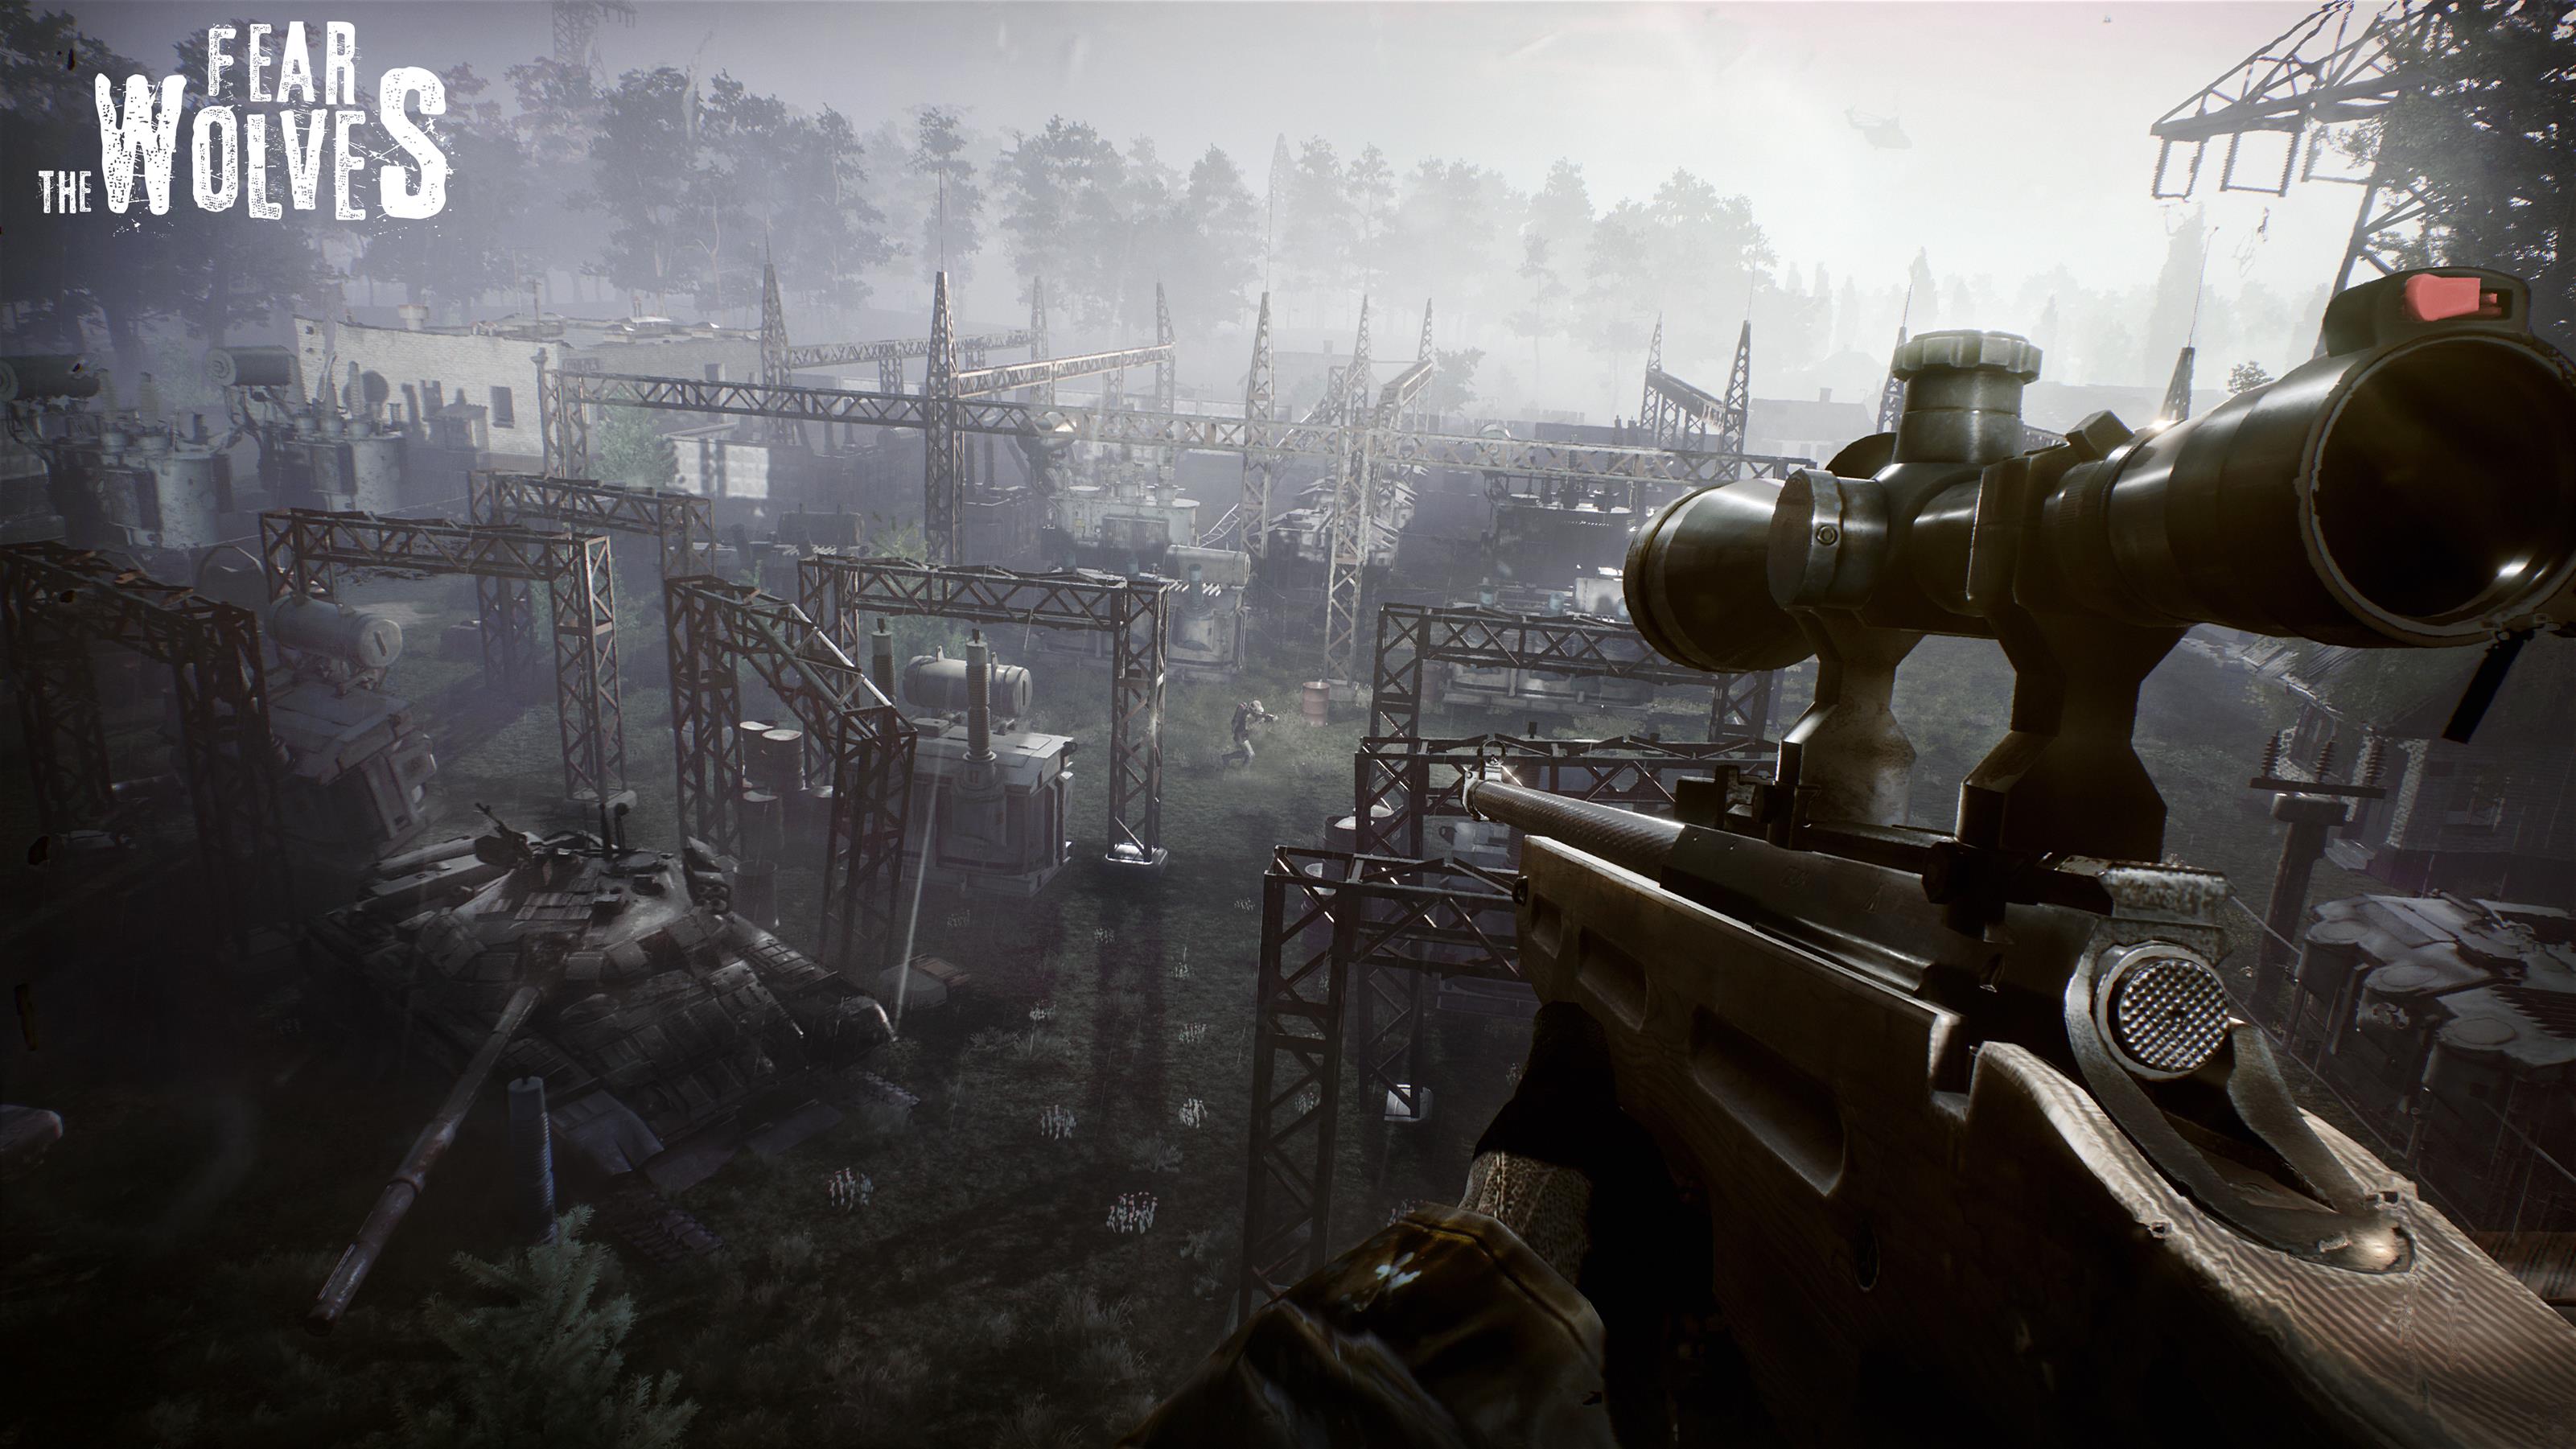 Image for Here's our first look at battle royale survival shooter Fear the Wolves